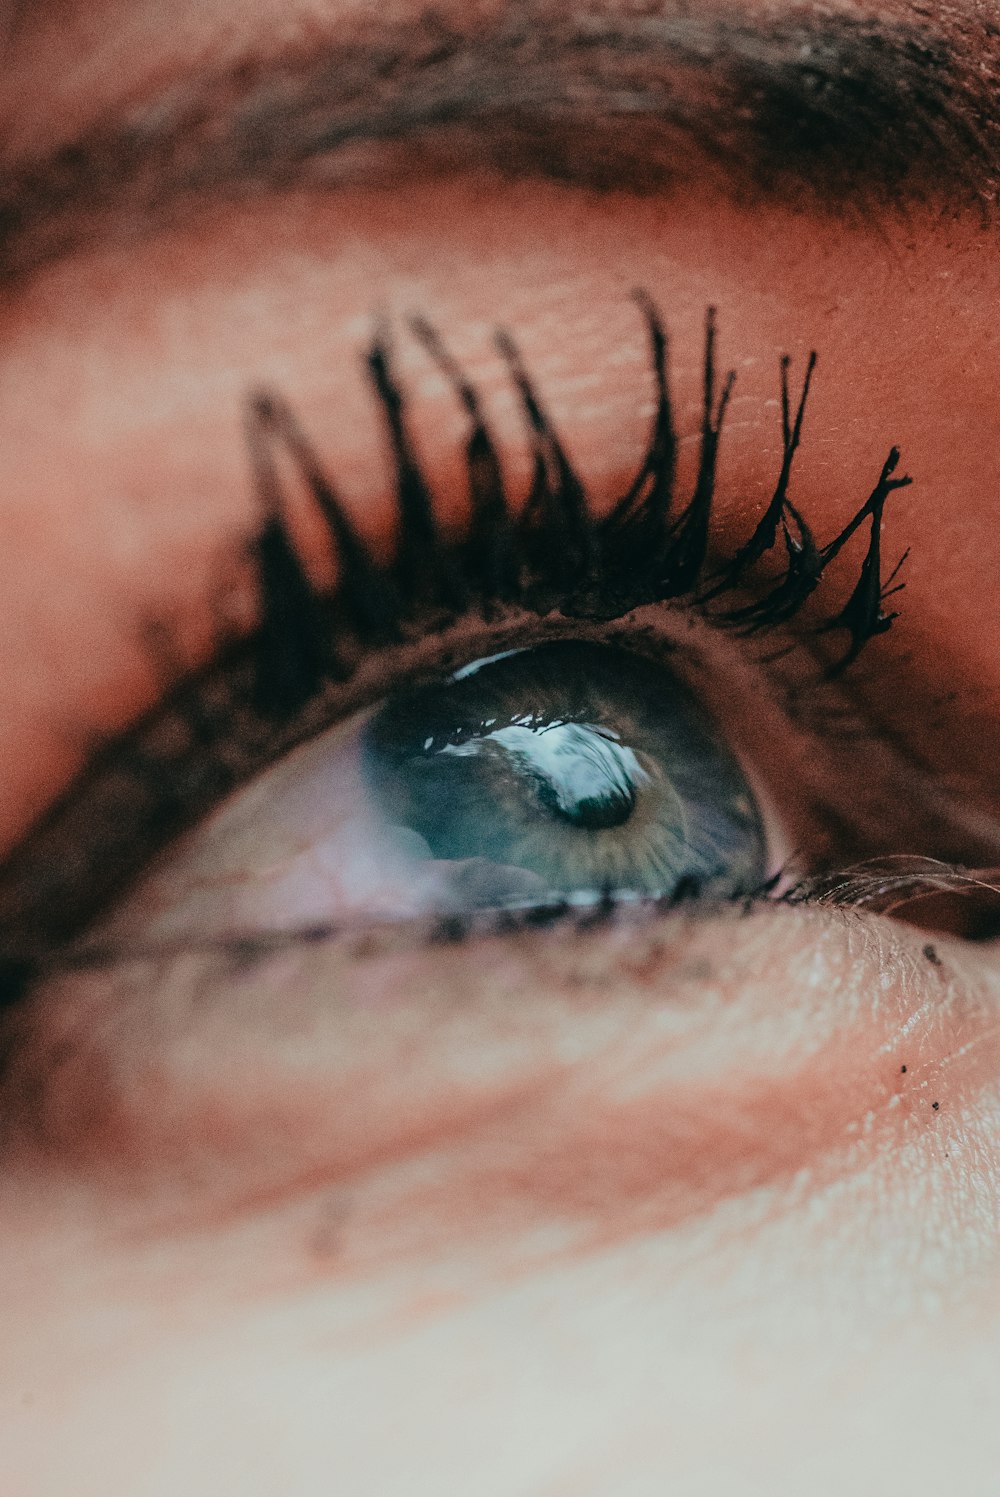 a close up of a person's eye with long lashes